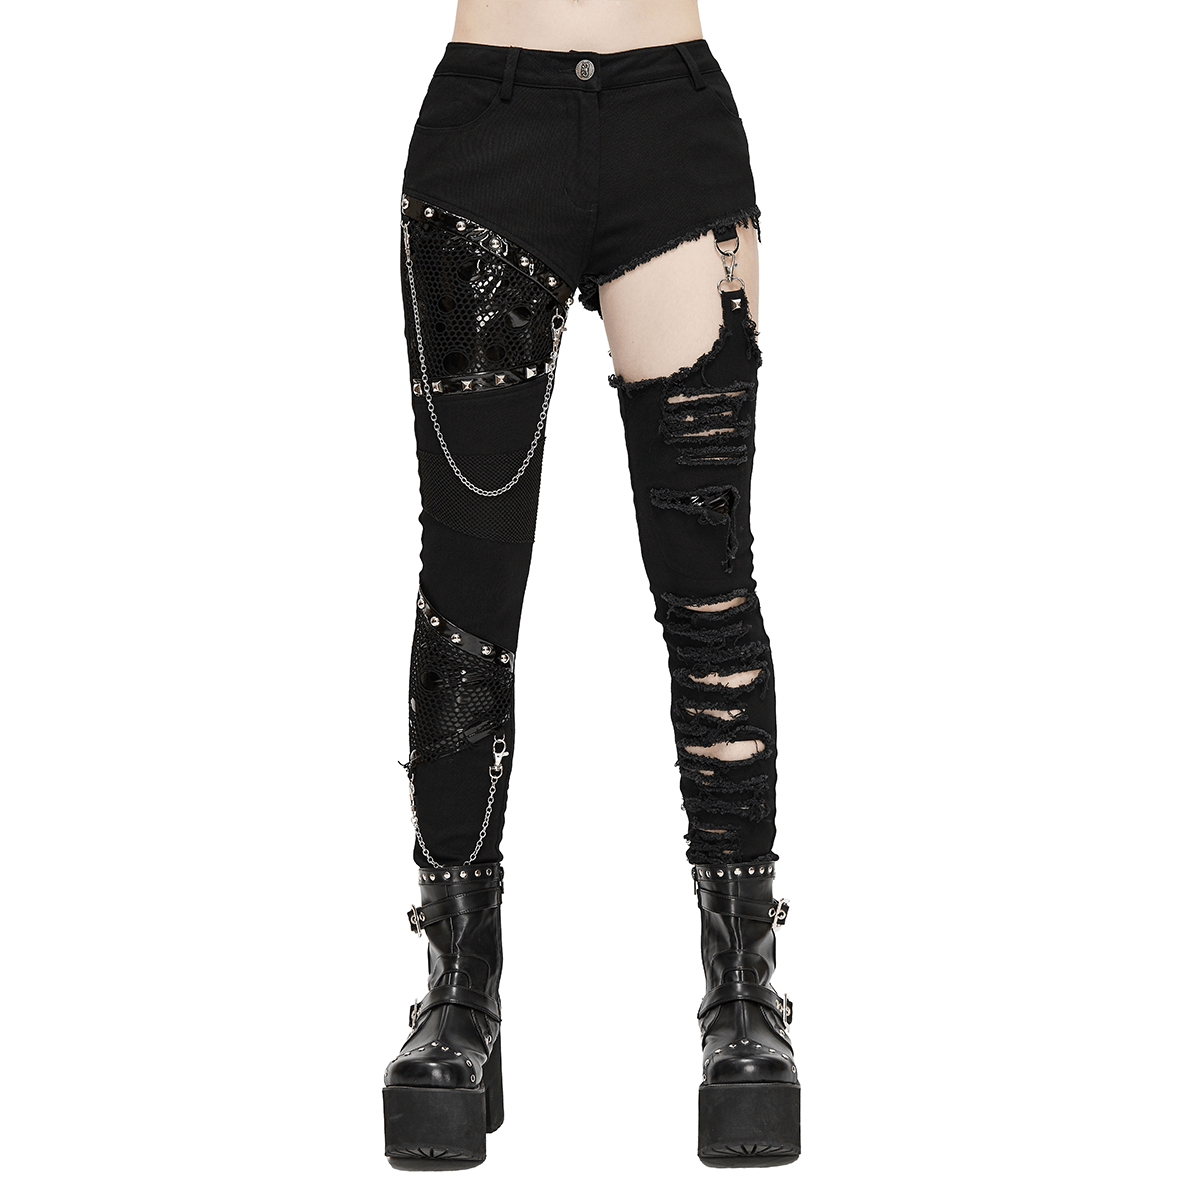 Black Asymmetrical Pants with Chain / Gothic Skinny Trousers with Ripped Effect - HARD'N'HEAVY